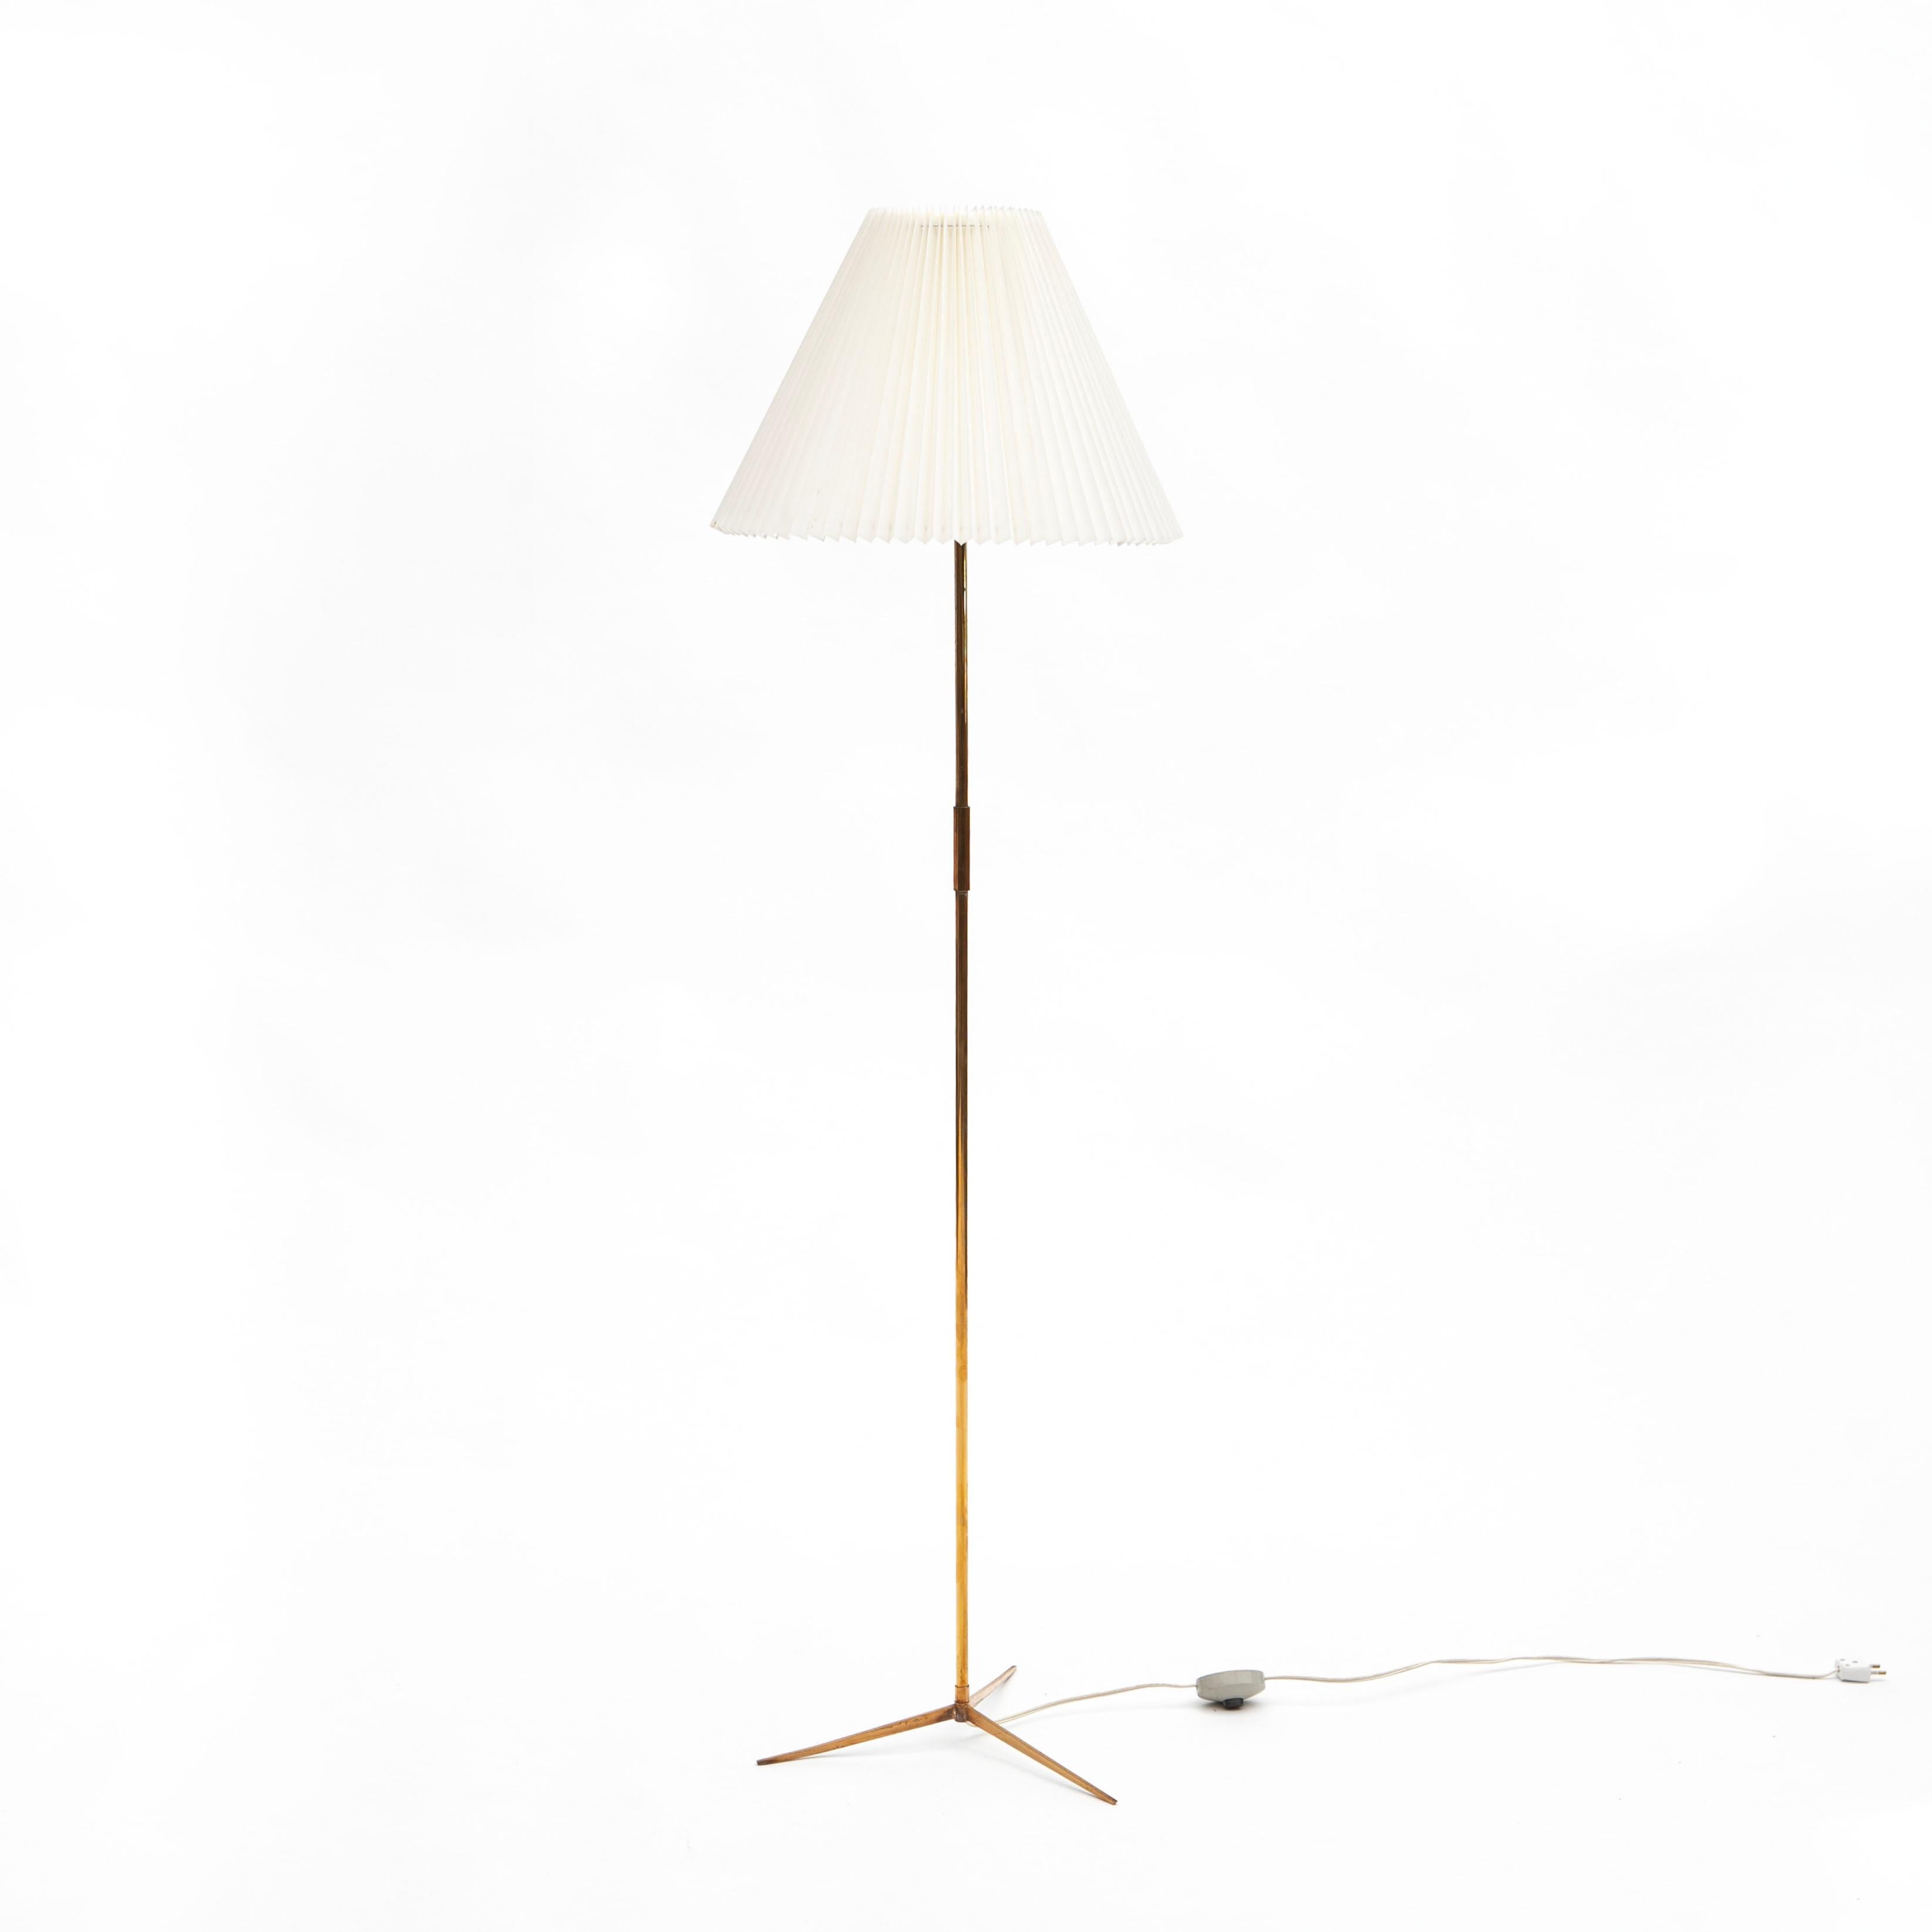 Elegant high quality brass floor lamp designed by T.H. Valentiner. Produced by Poul Dinesen in Denmark, 1960's.
This lamp was a wedding present acquired directly from the manufacturer and Th. Valentiner, who were friends with the bride's